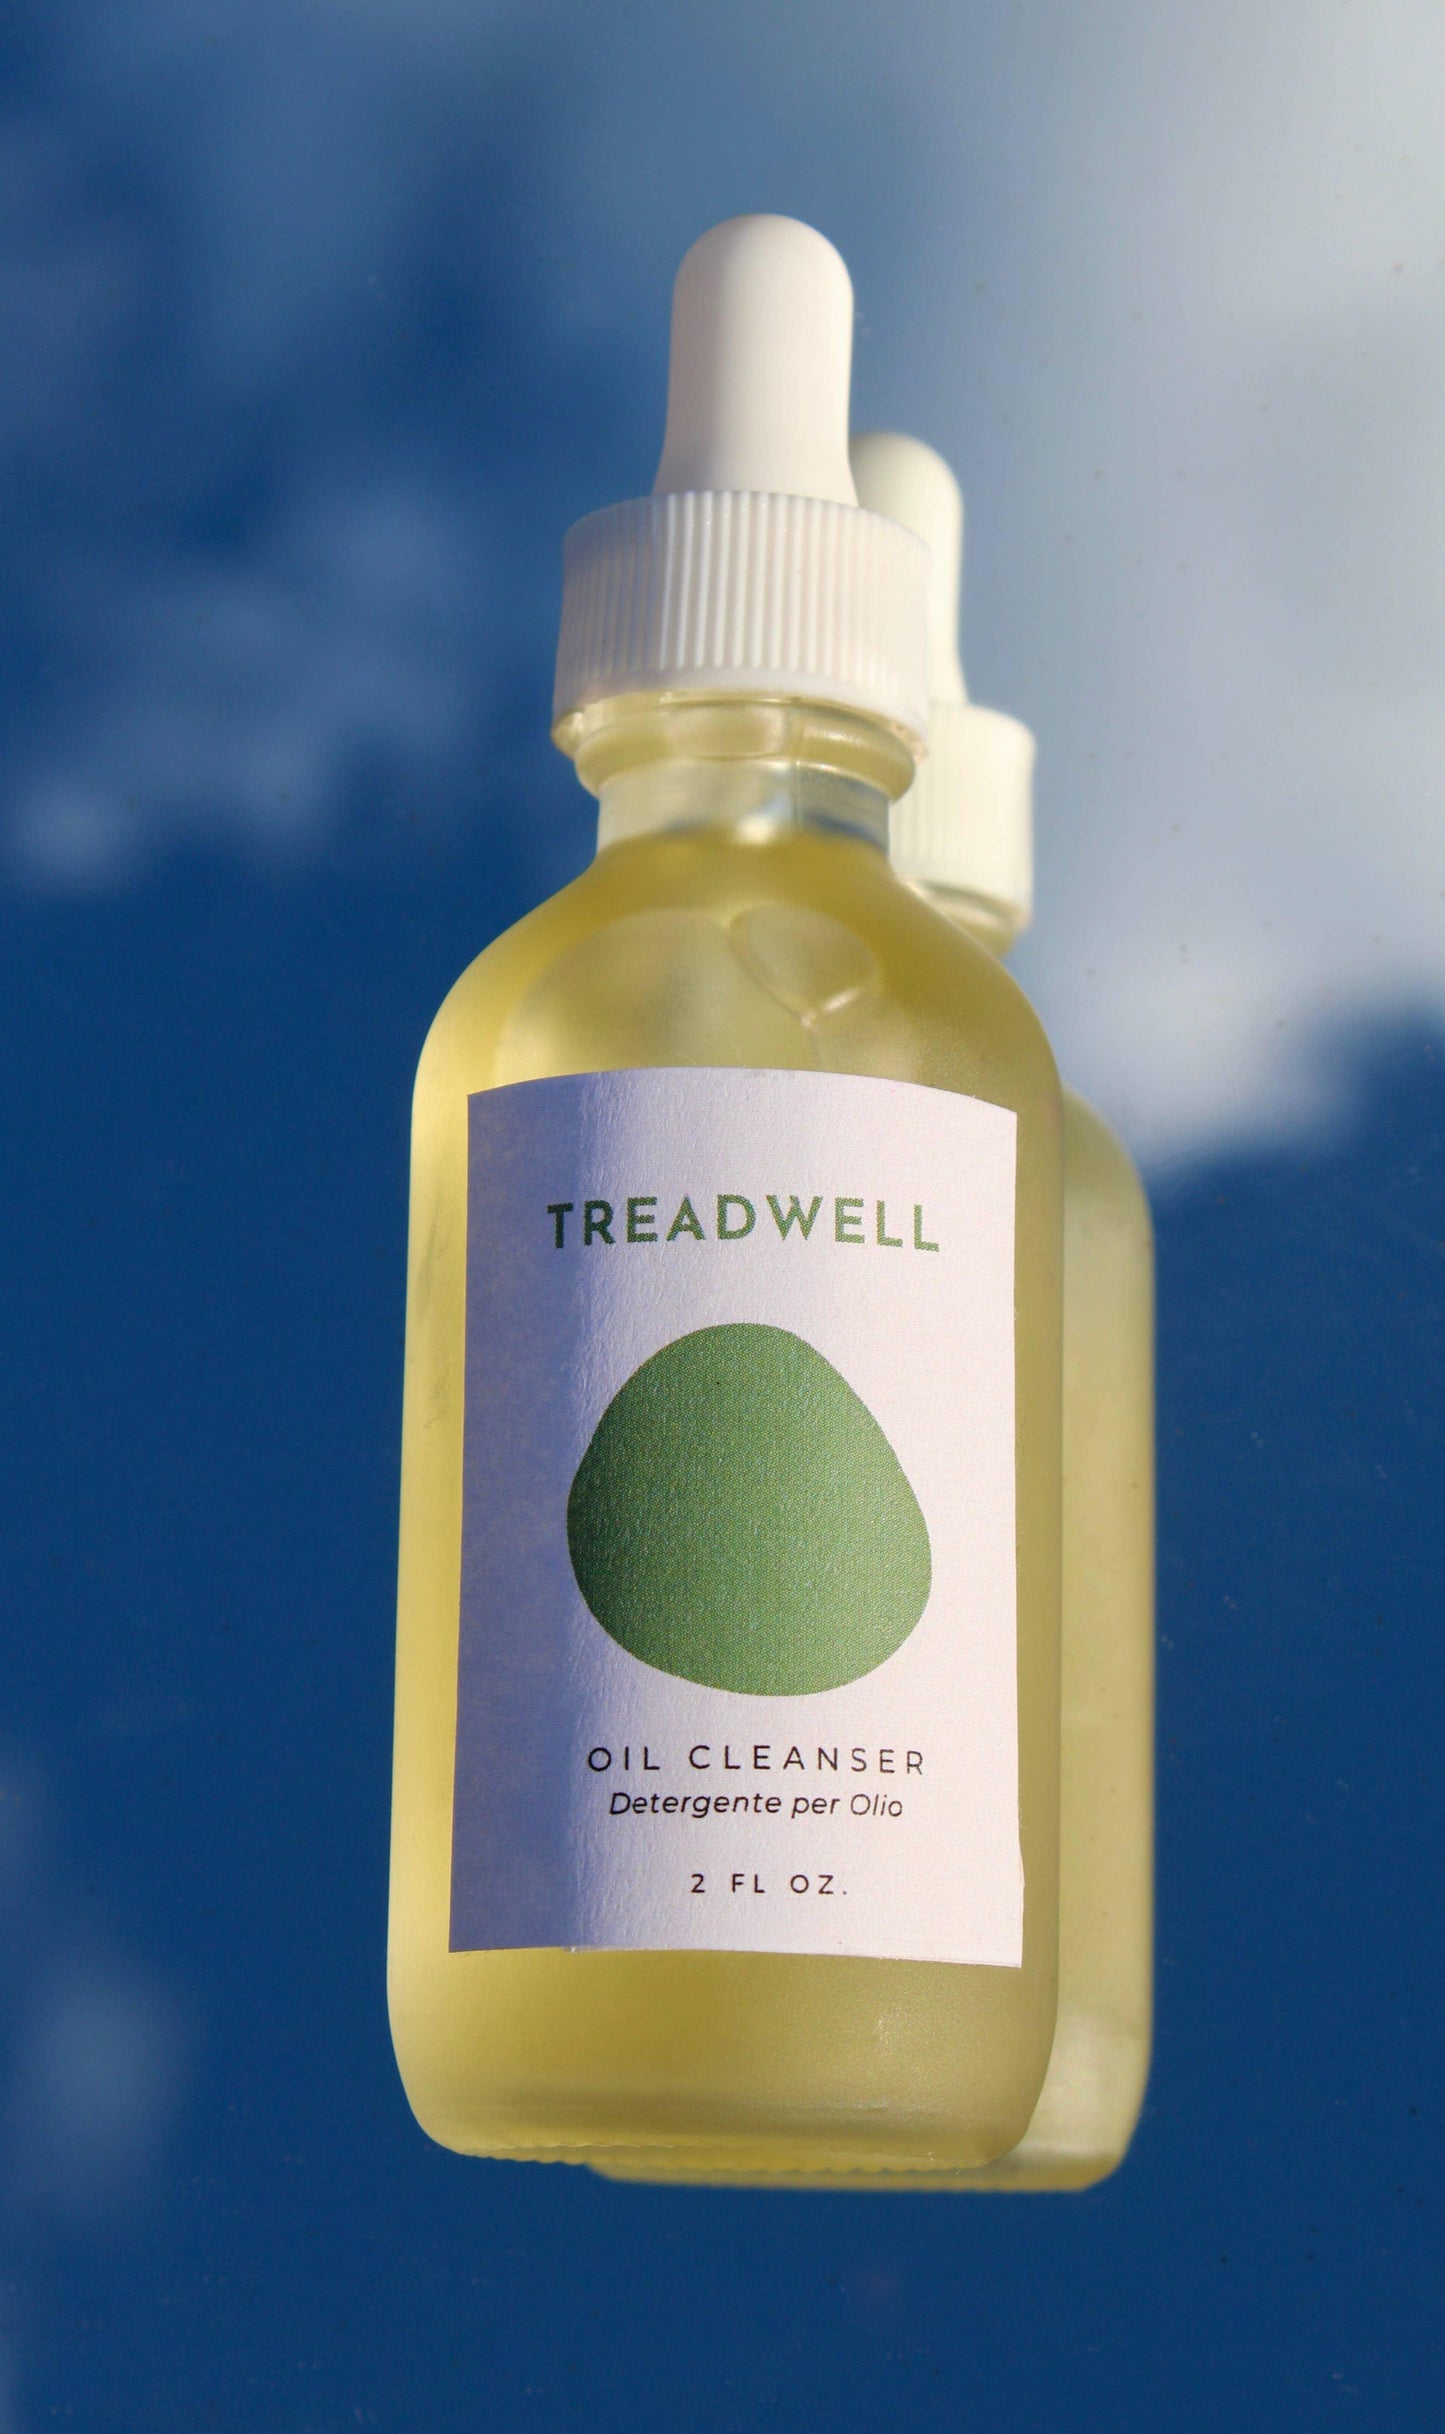 Oil Cleanser, 2 fl oz by Treadwell - Haven